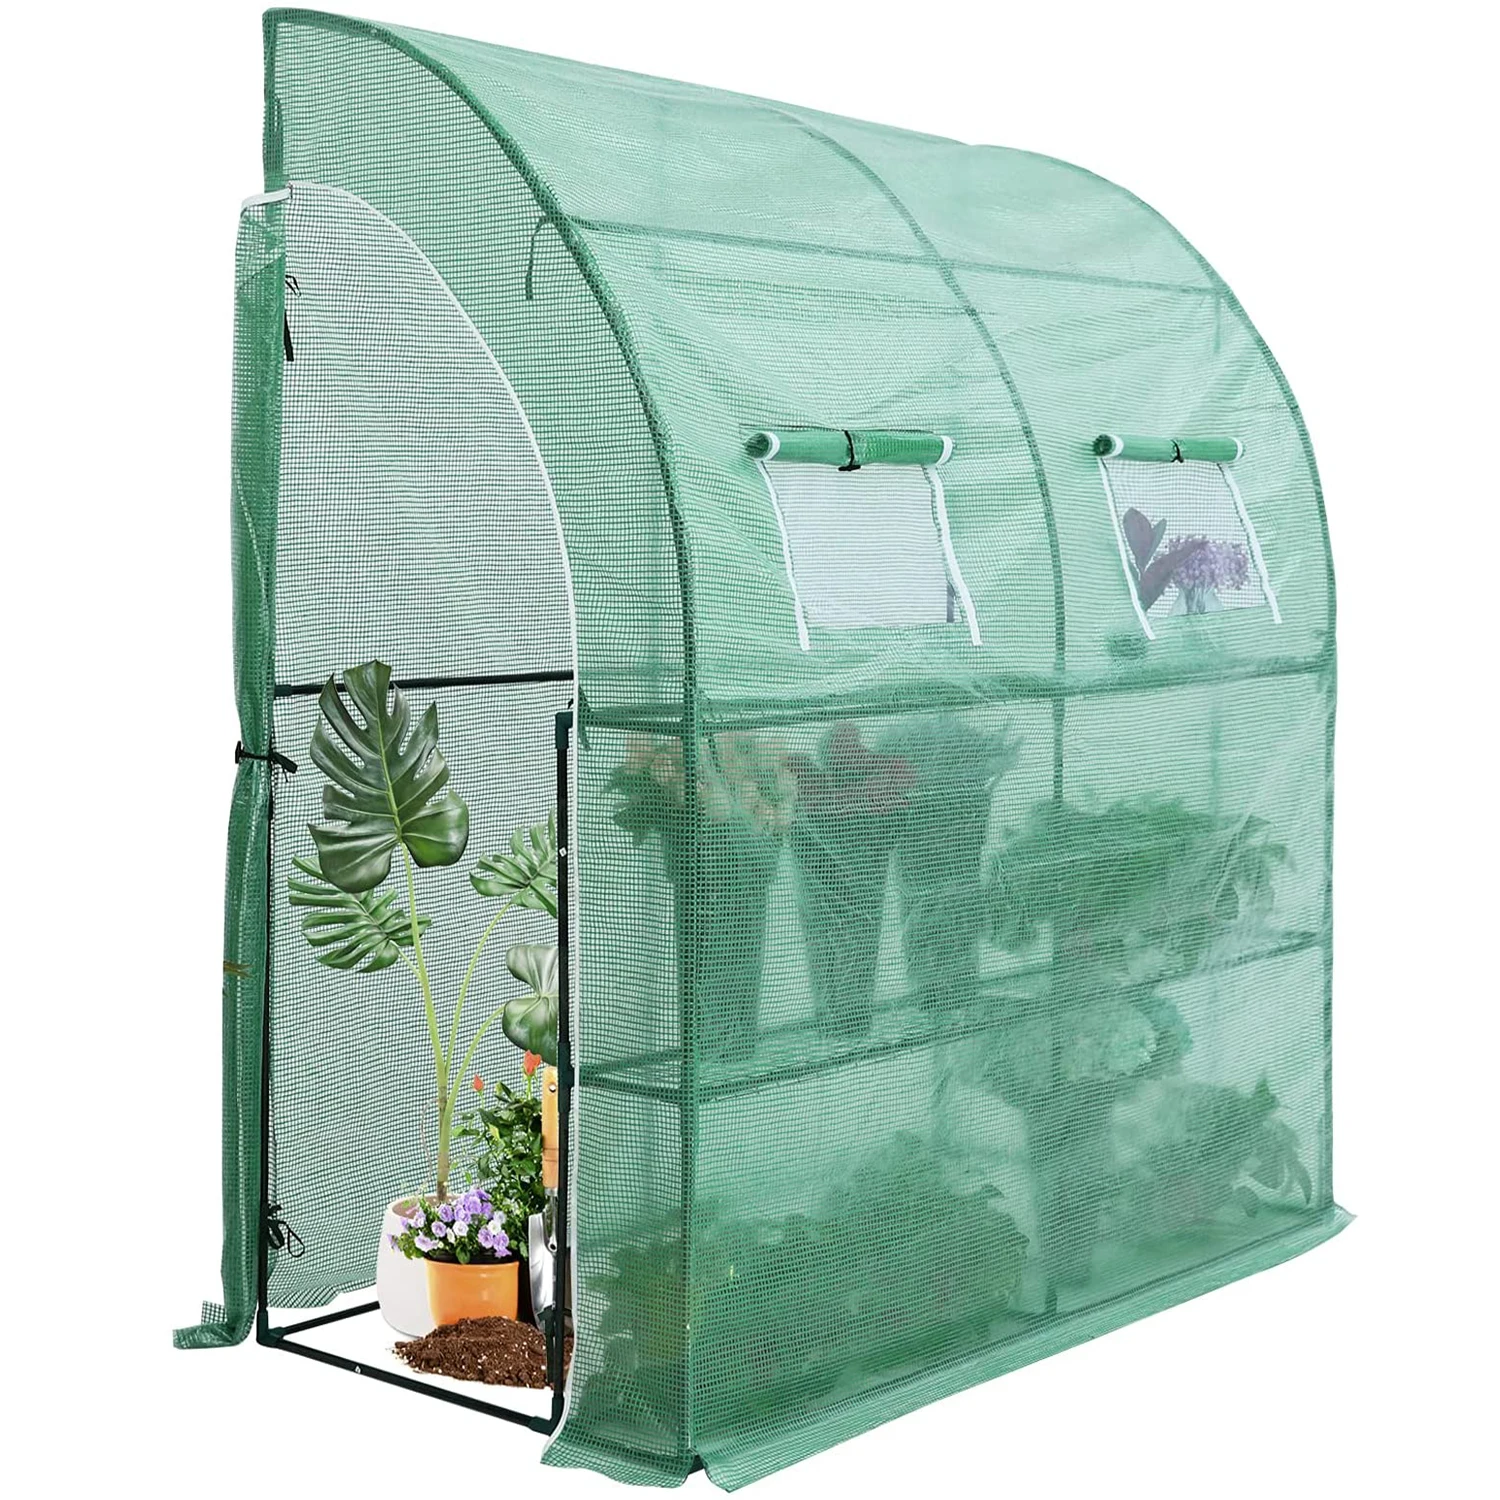 

Lean-to Walk-in Greenhouse, Portable Gardening Greenhouse for Indoor Outdoor with 2 Tier 4 Shelves Green PE Cover(US spot)